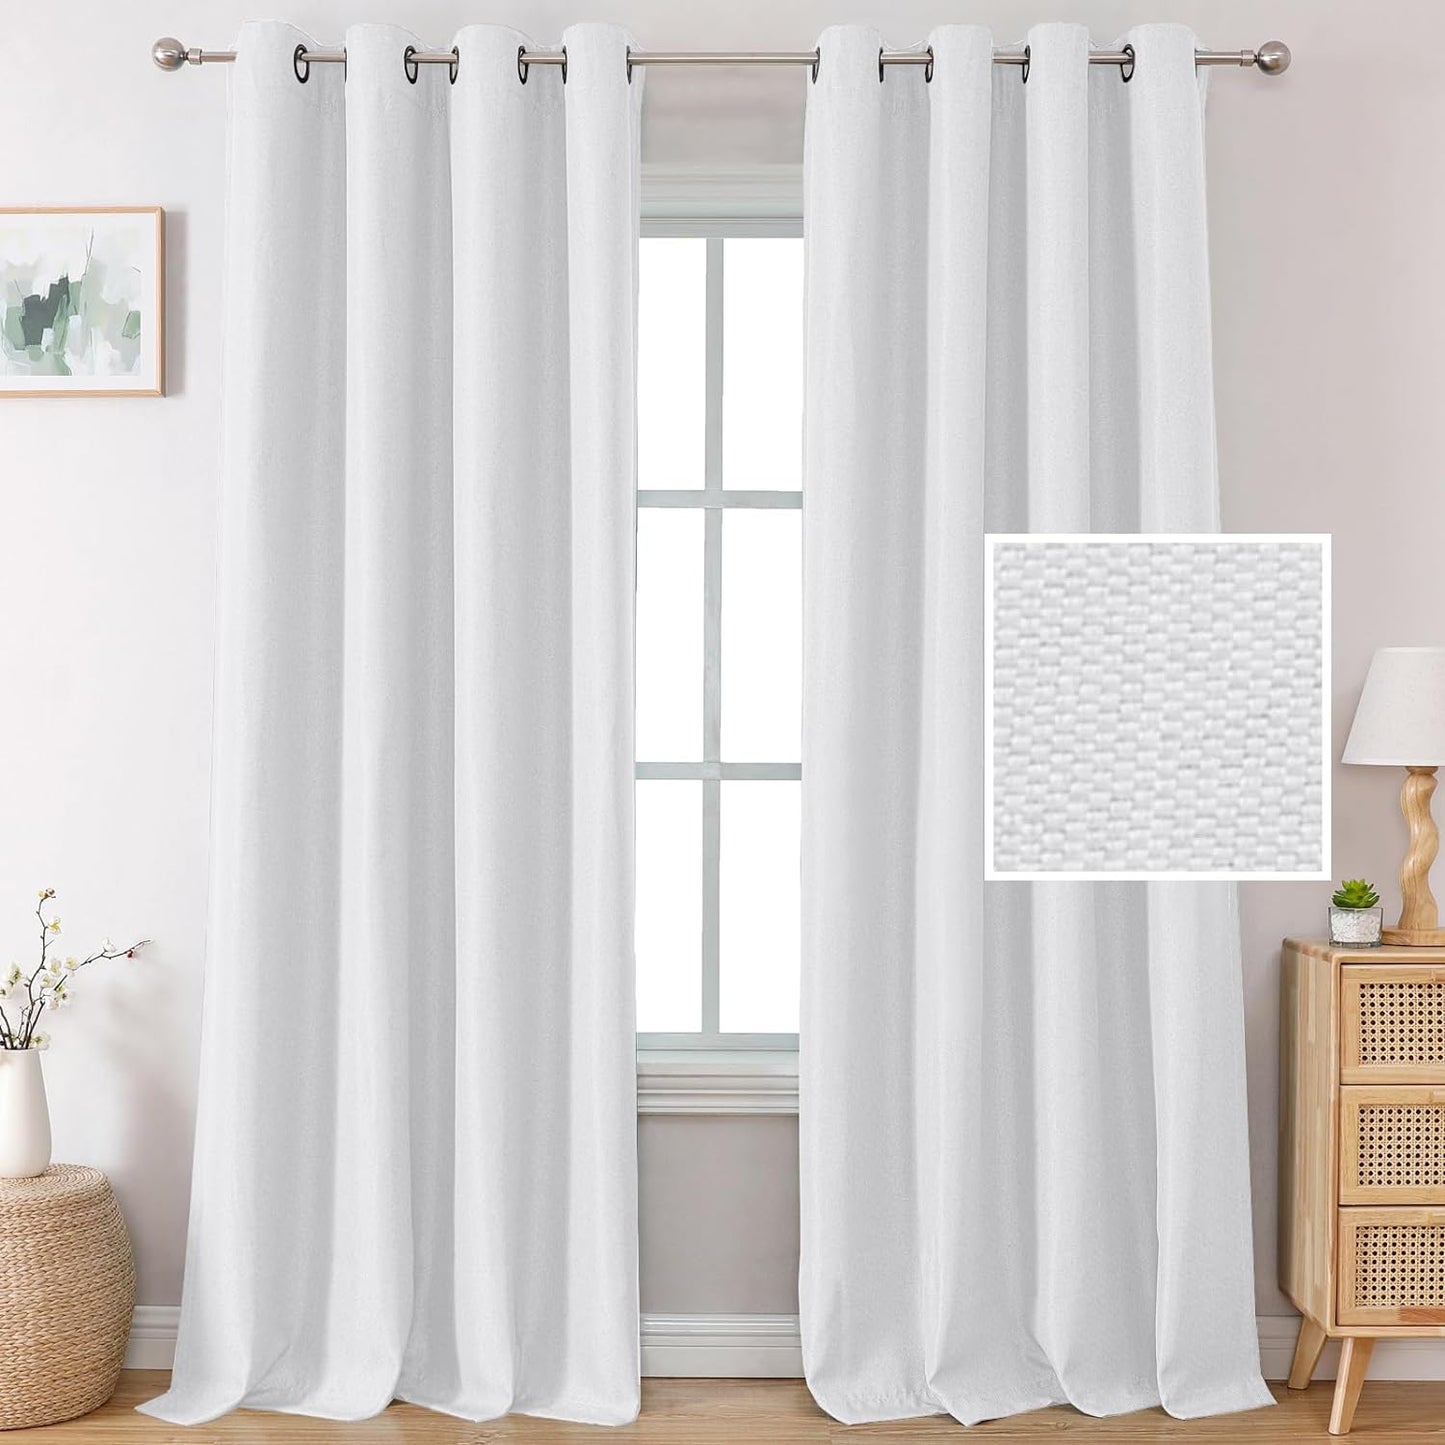 H.VERSAILTEX Linen Blackout Curtains 84 Inches Long Thermal Insulated Room Darkening Linen Curtains for Bedroom Textured Burlap Grommet Window Curtains for Living Room, Bluestone and Taupe, 2 Panels  H.VERSAILTEX Pure White 52"W X 96"L 